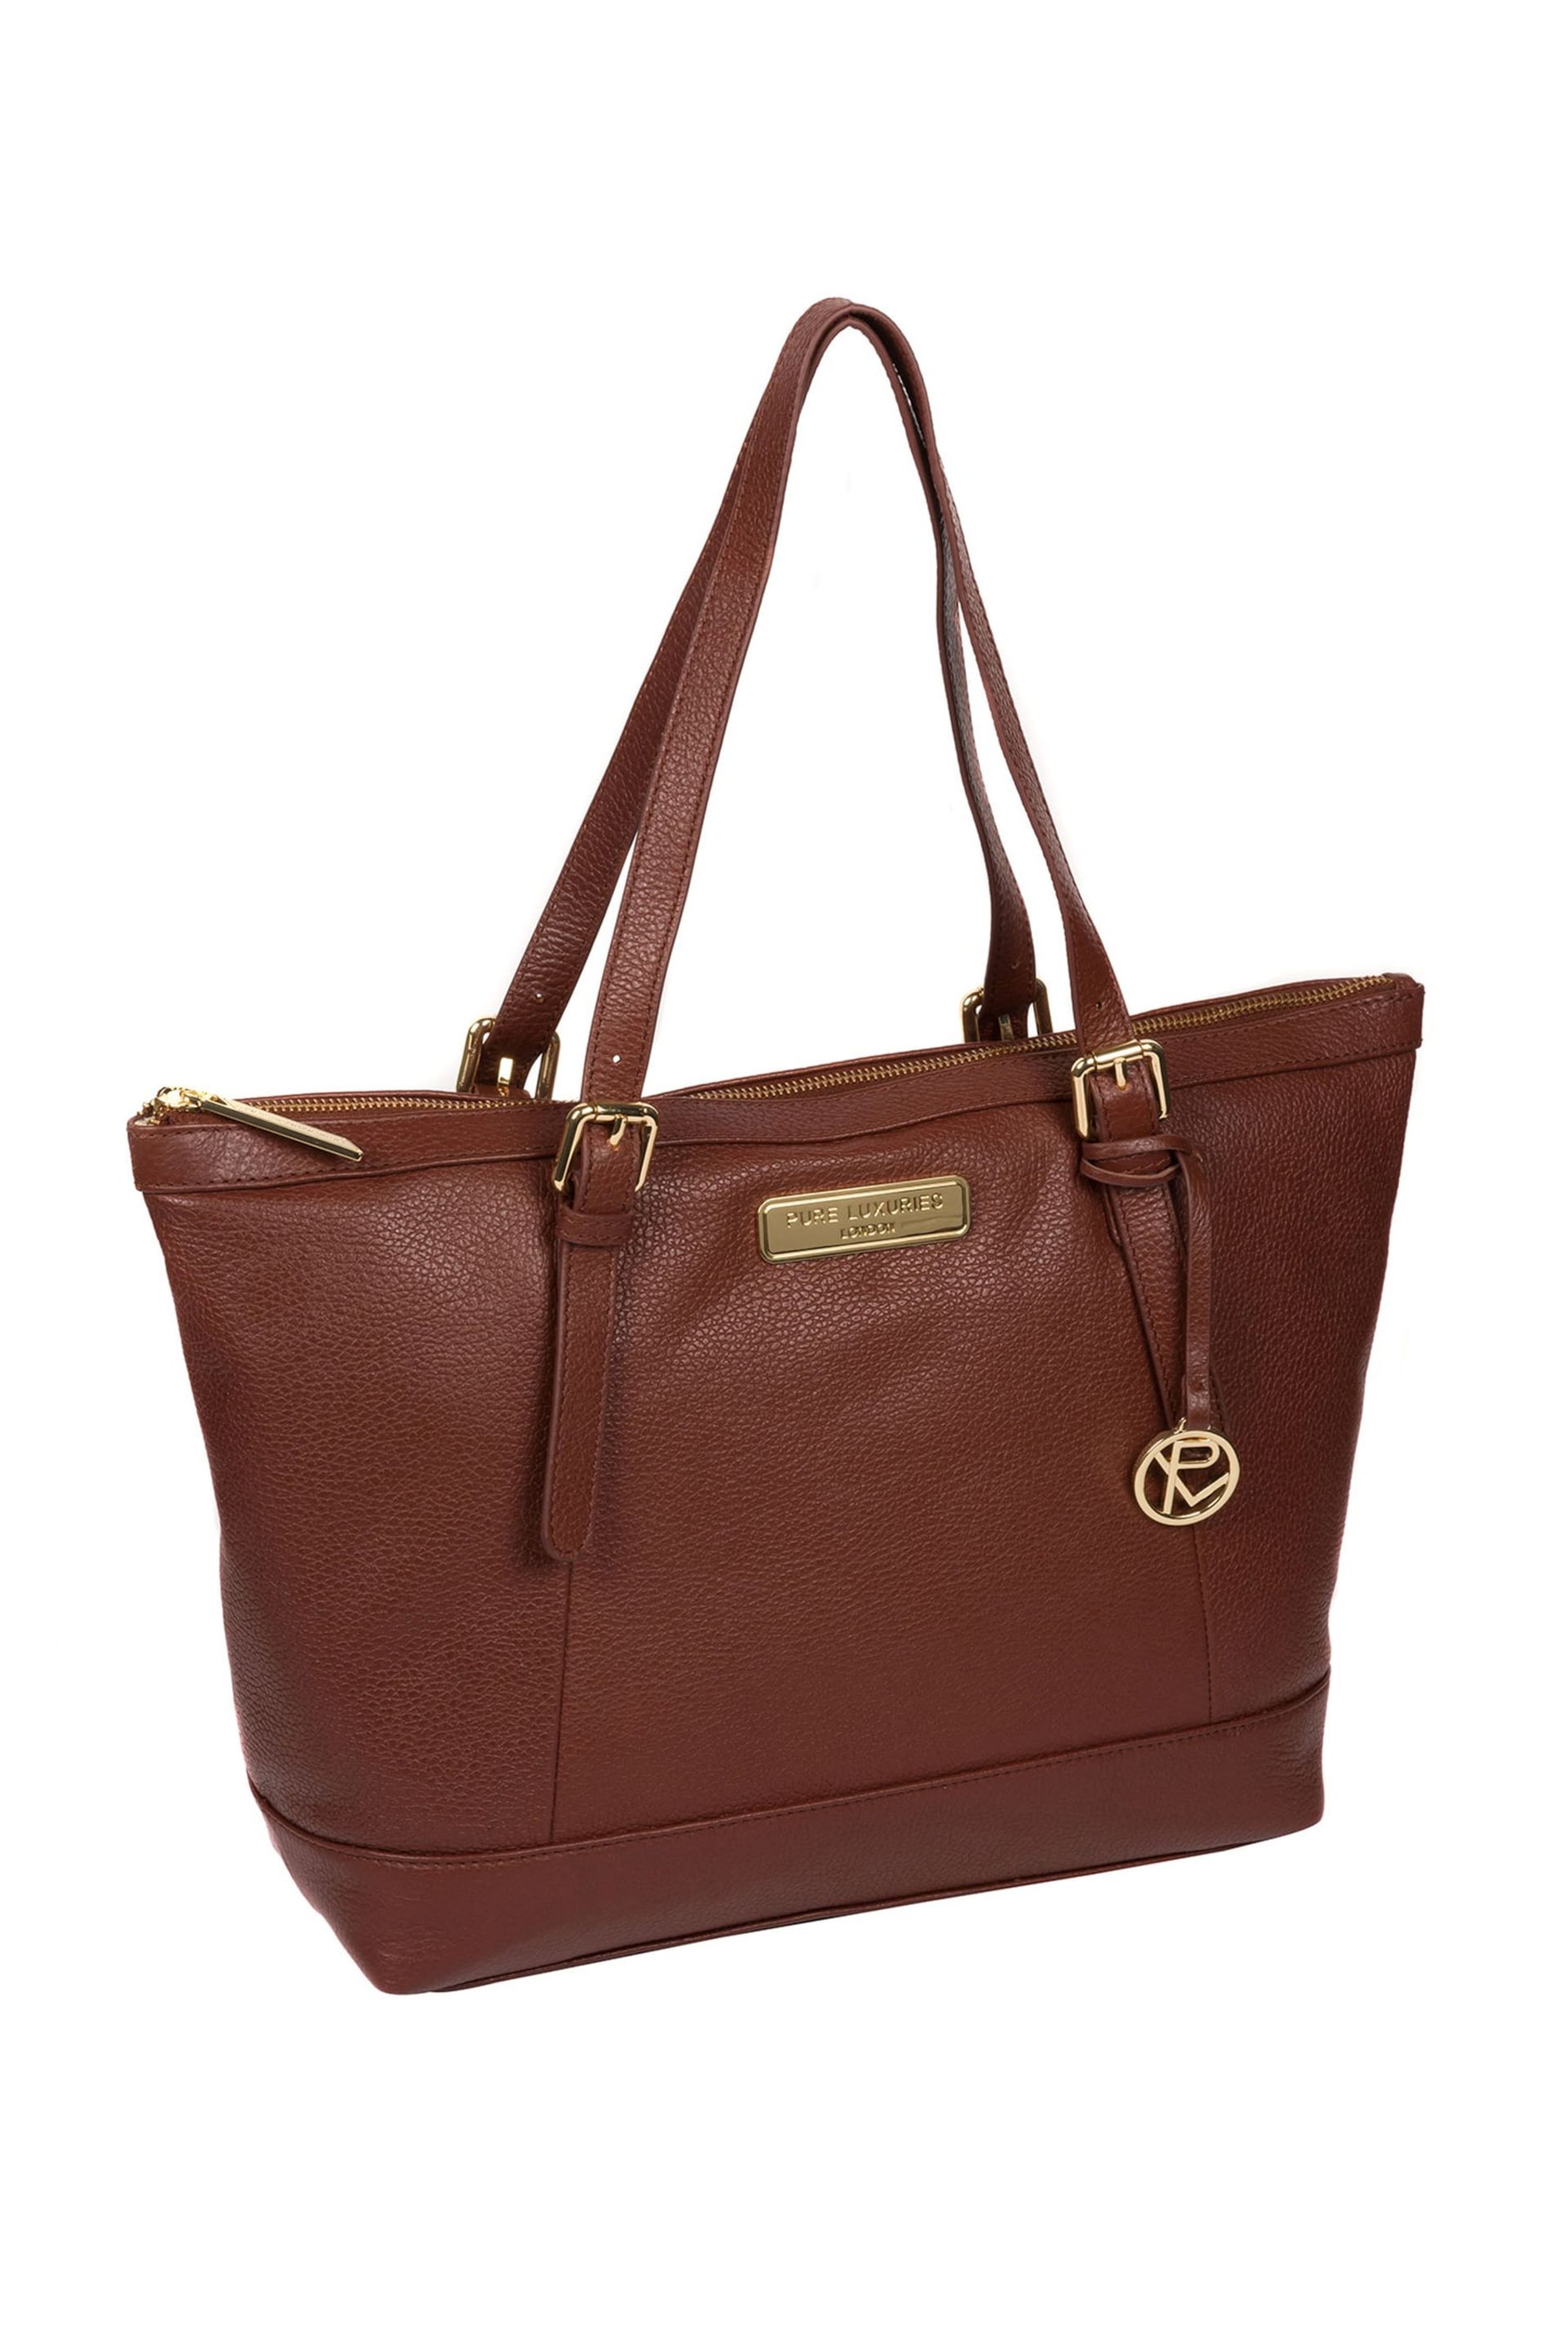 Pure Luxuries London Emily Leather Tote Bag - Image 3 of 5